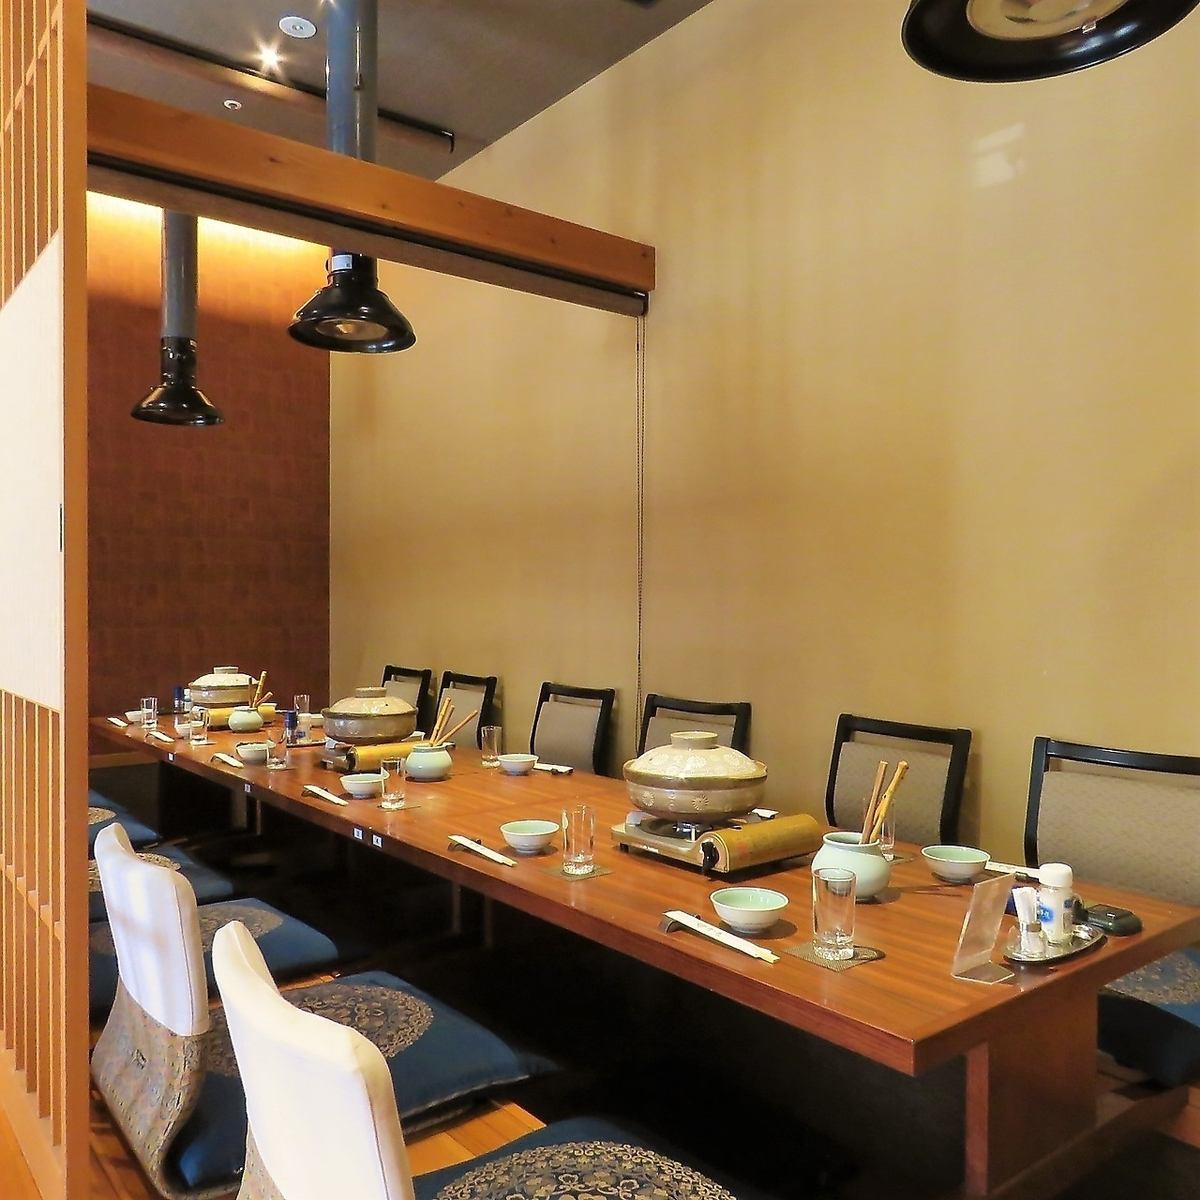 We also have private rooms where you can relax without worrying about time or those around you.